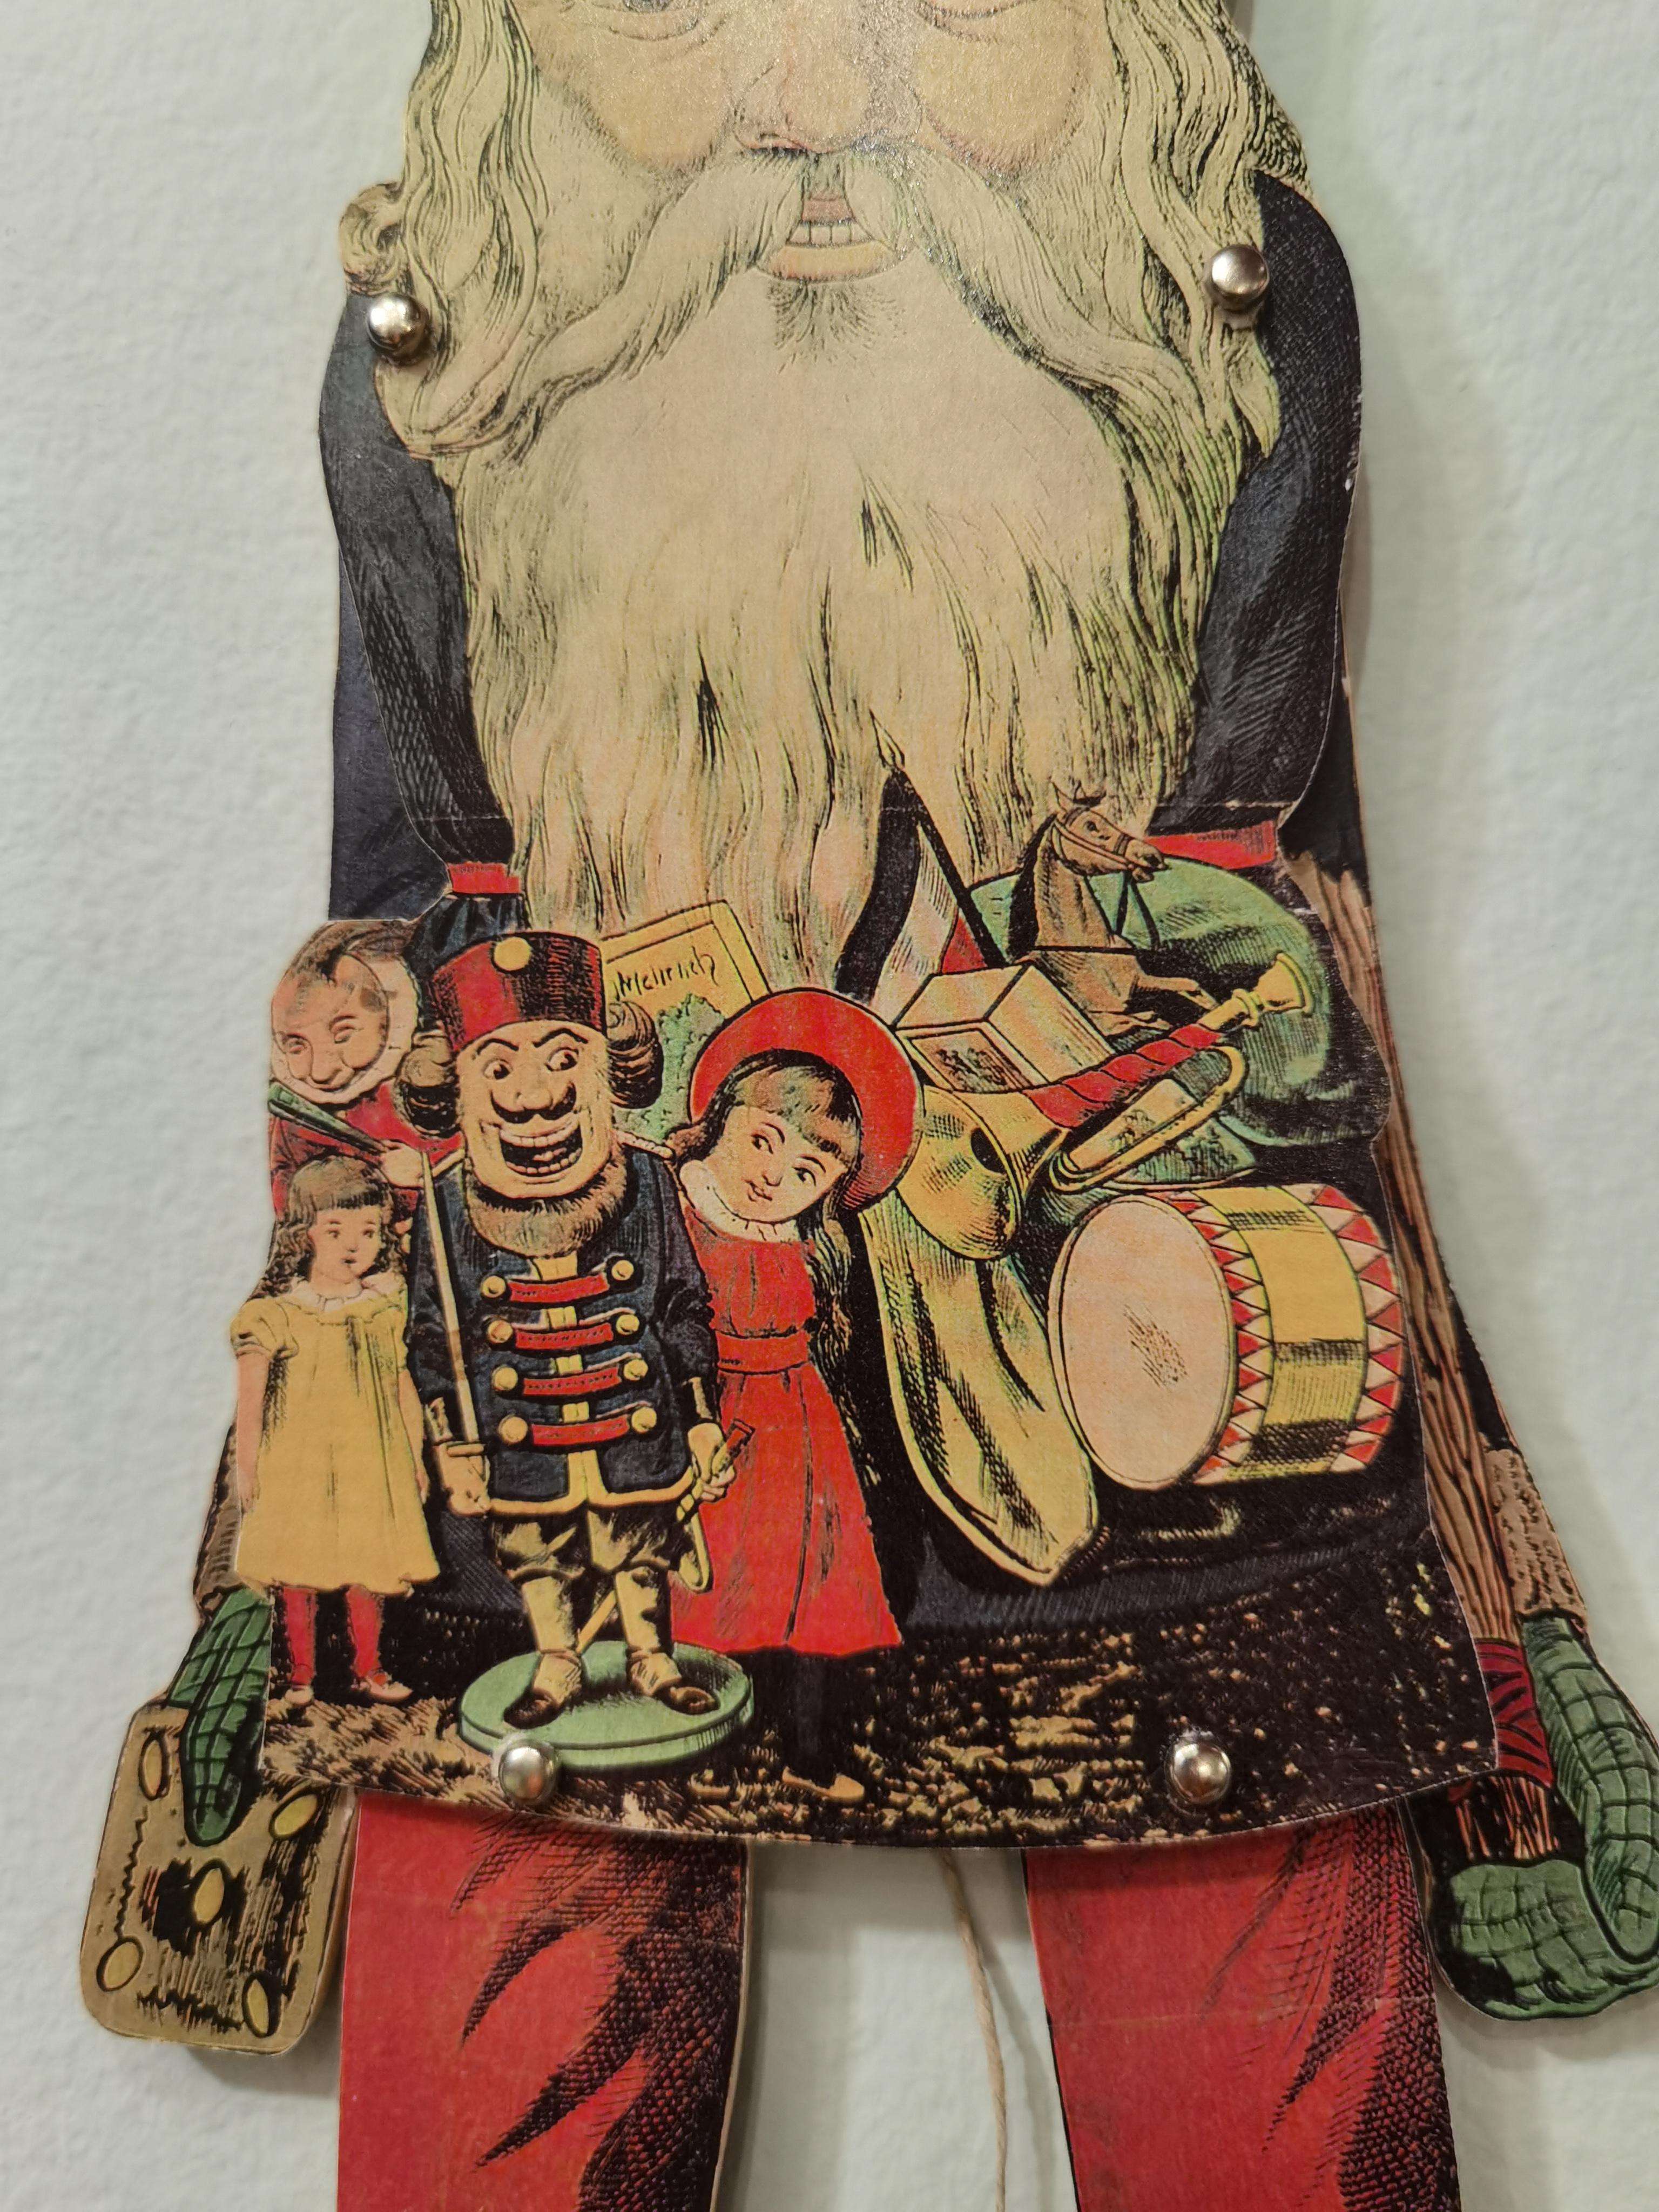 Vintage christmas jumping jack in wood. The front covered in paper with a beautiful vintage decoration Handmade in the area of Erzgebirge Germany. The area of Erzgebirge located in the former eastern part of Germany is very popular for beautiful